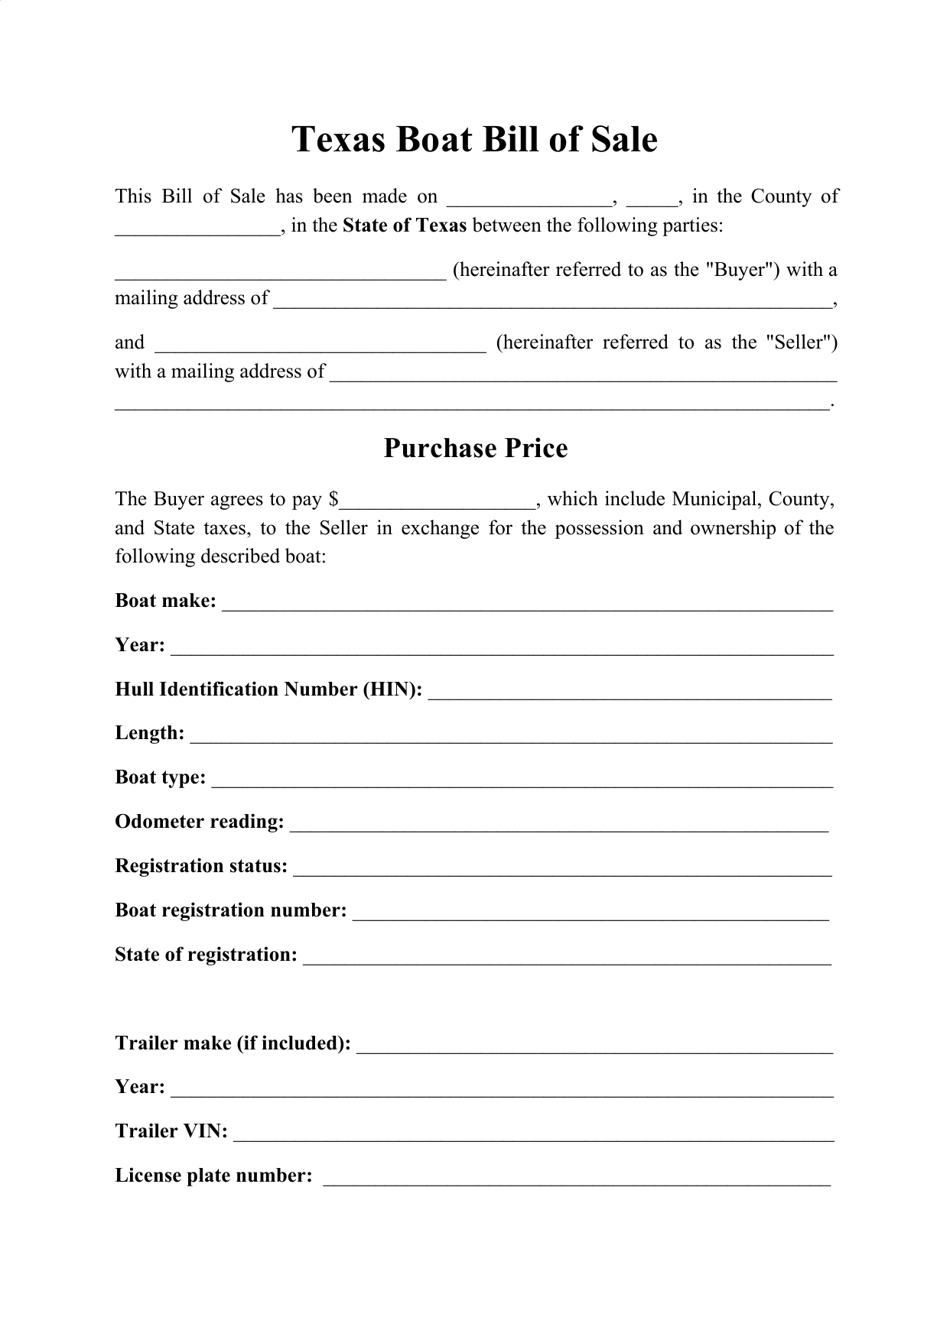 texas boat bill of sale download printable pdf templateroller